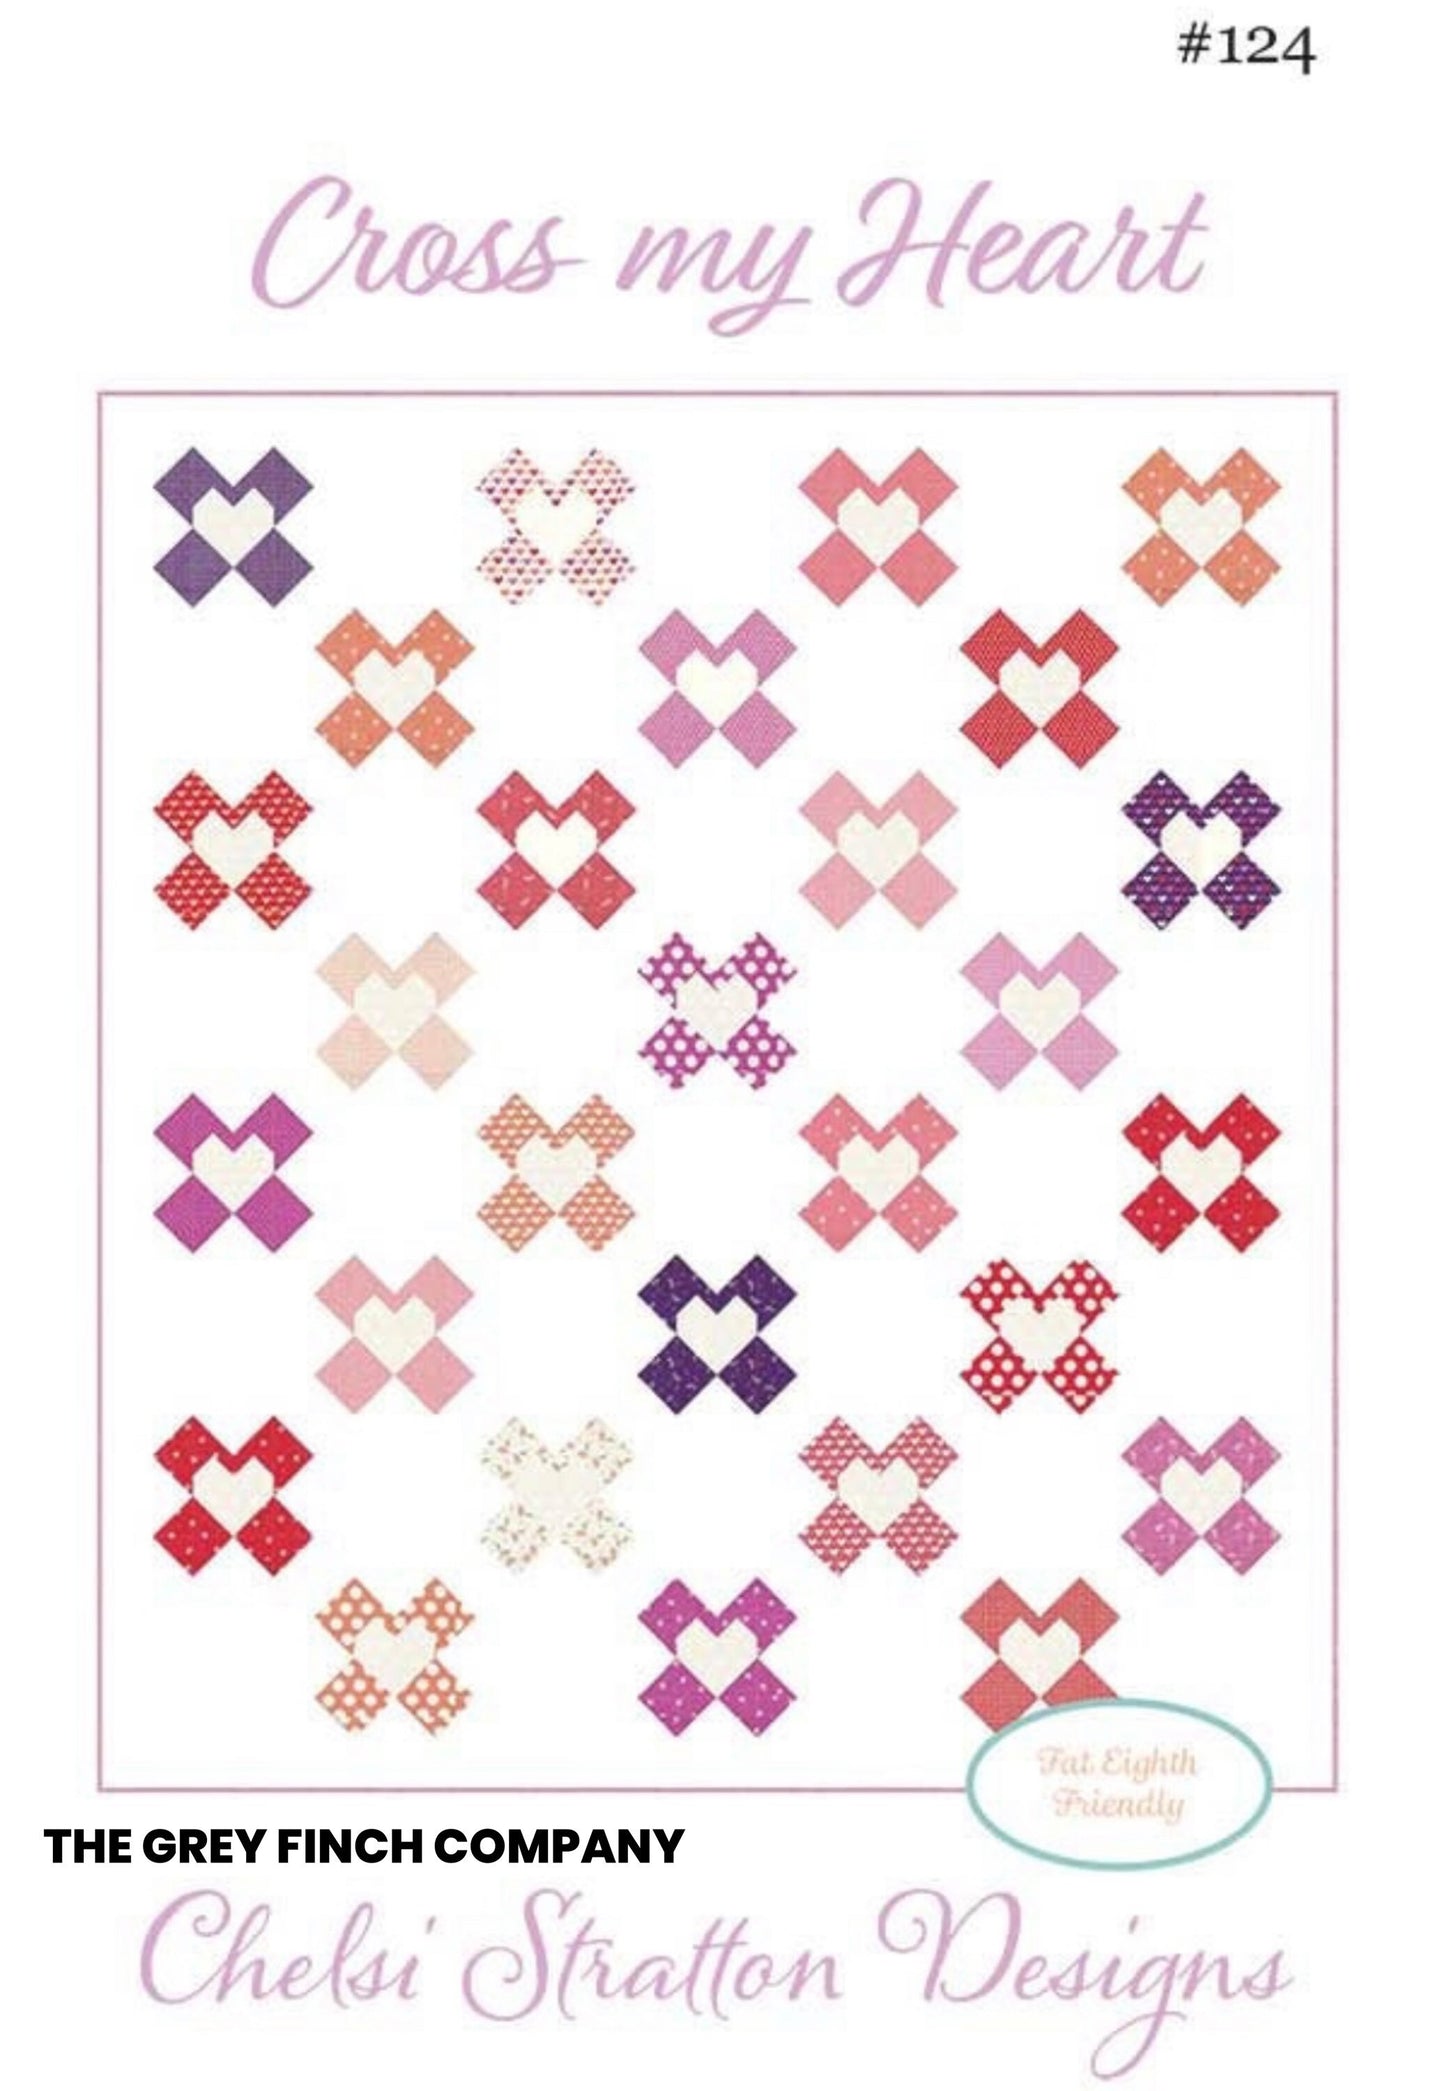 Cross My Heart Quilt Pattern by Chelsi Stratton